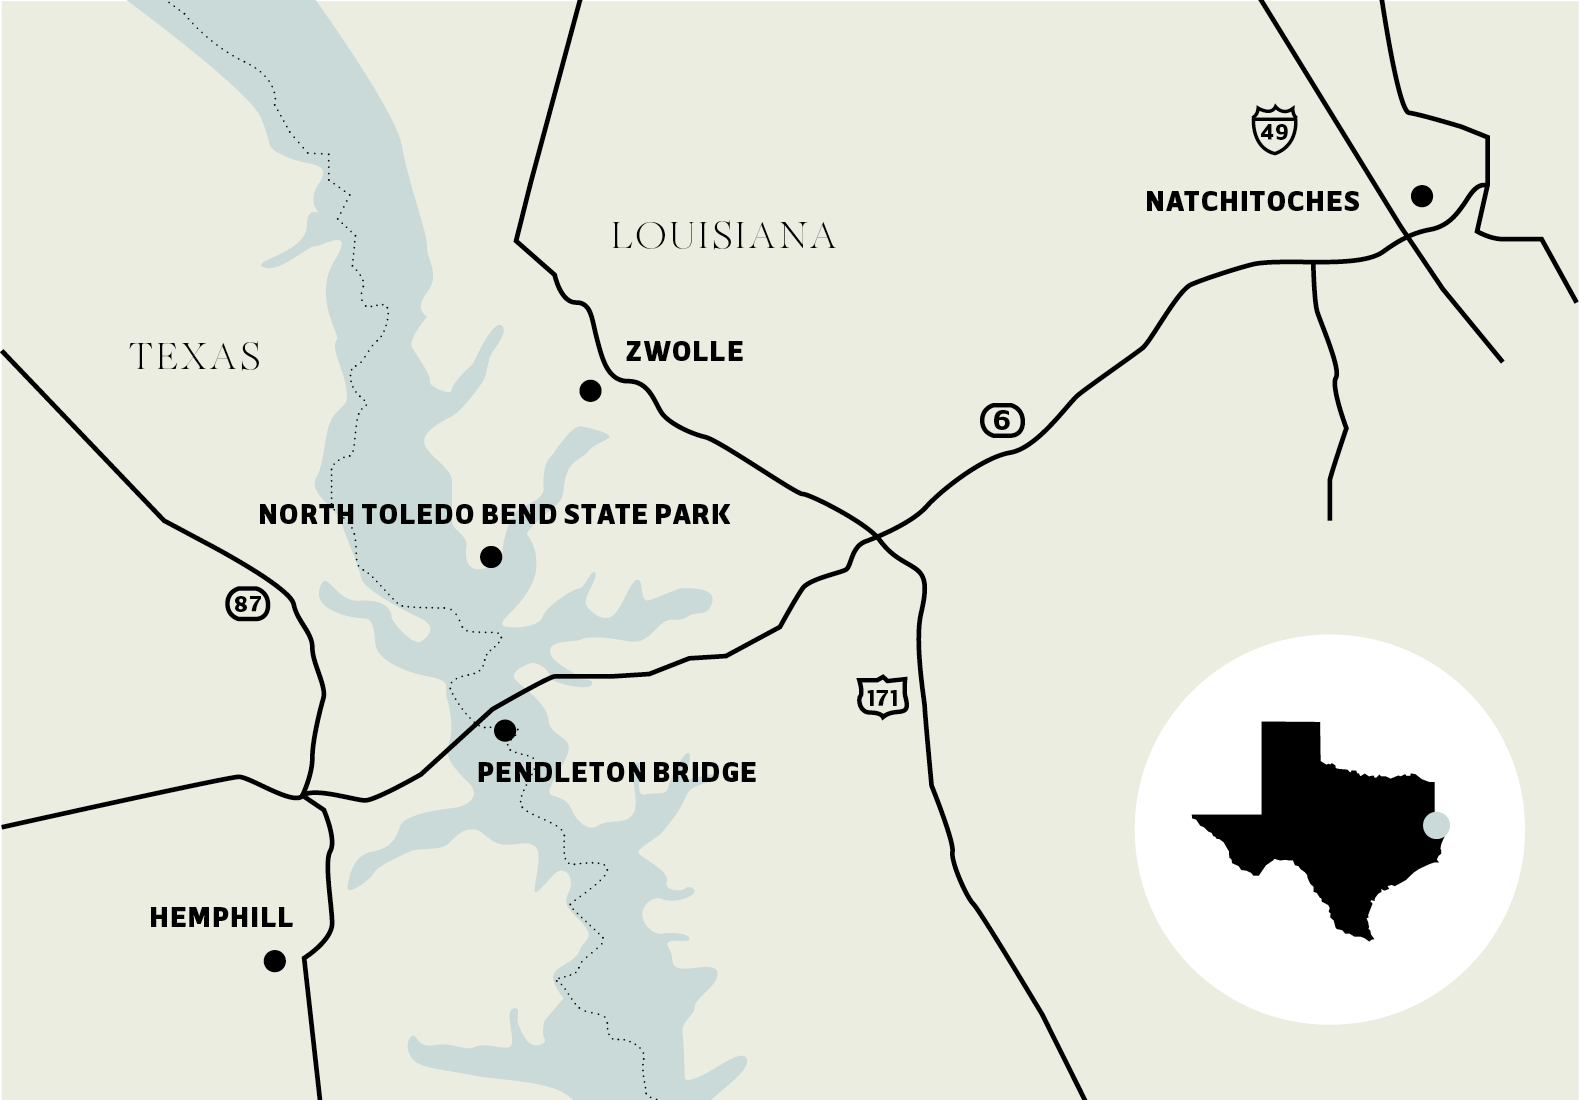 A map identifying several places in this story including Hemphill, Pendleton Bridge, North Toledo Bend State Park, and Zwolle